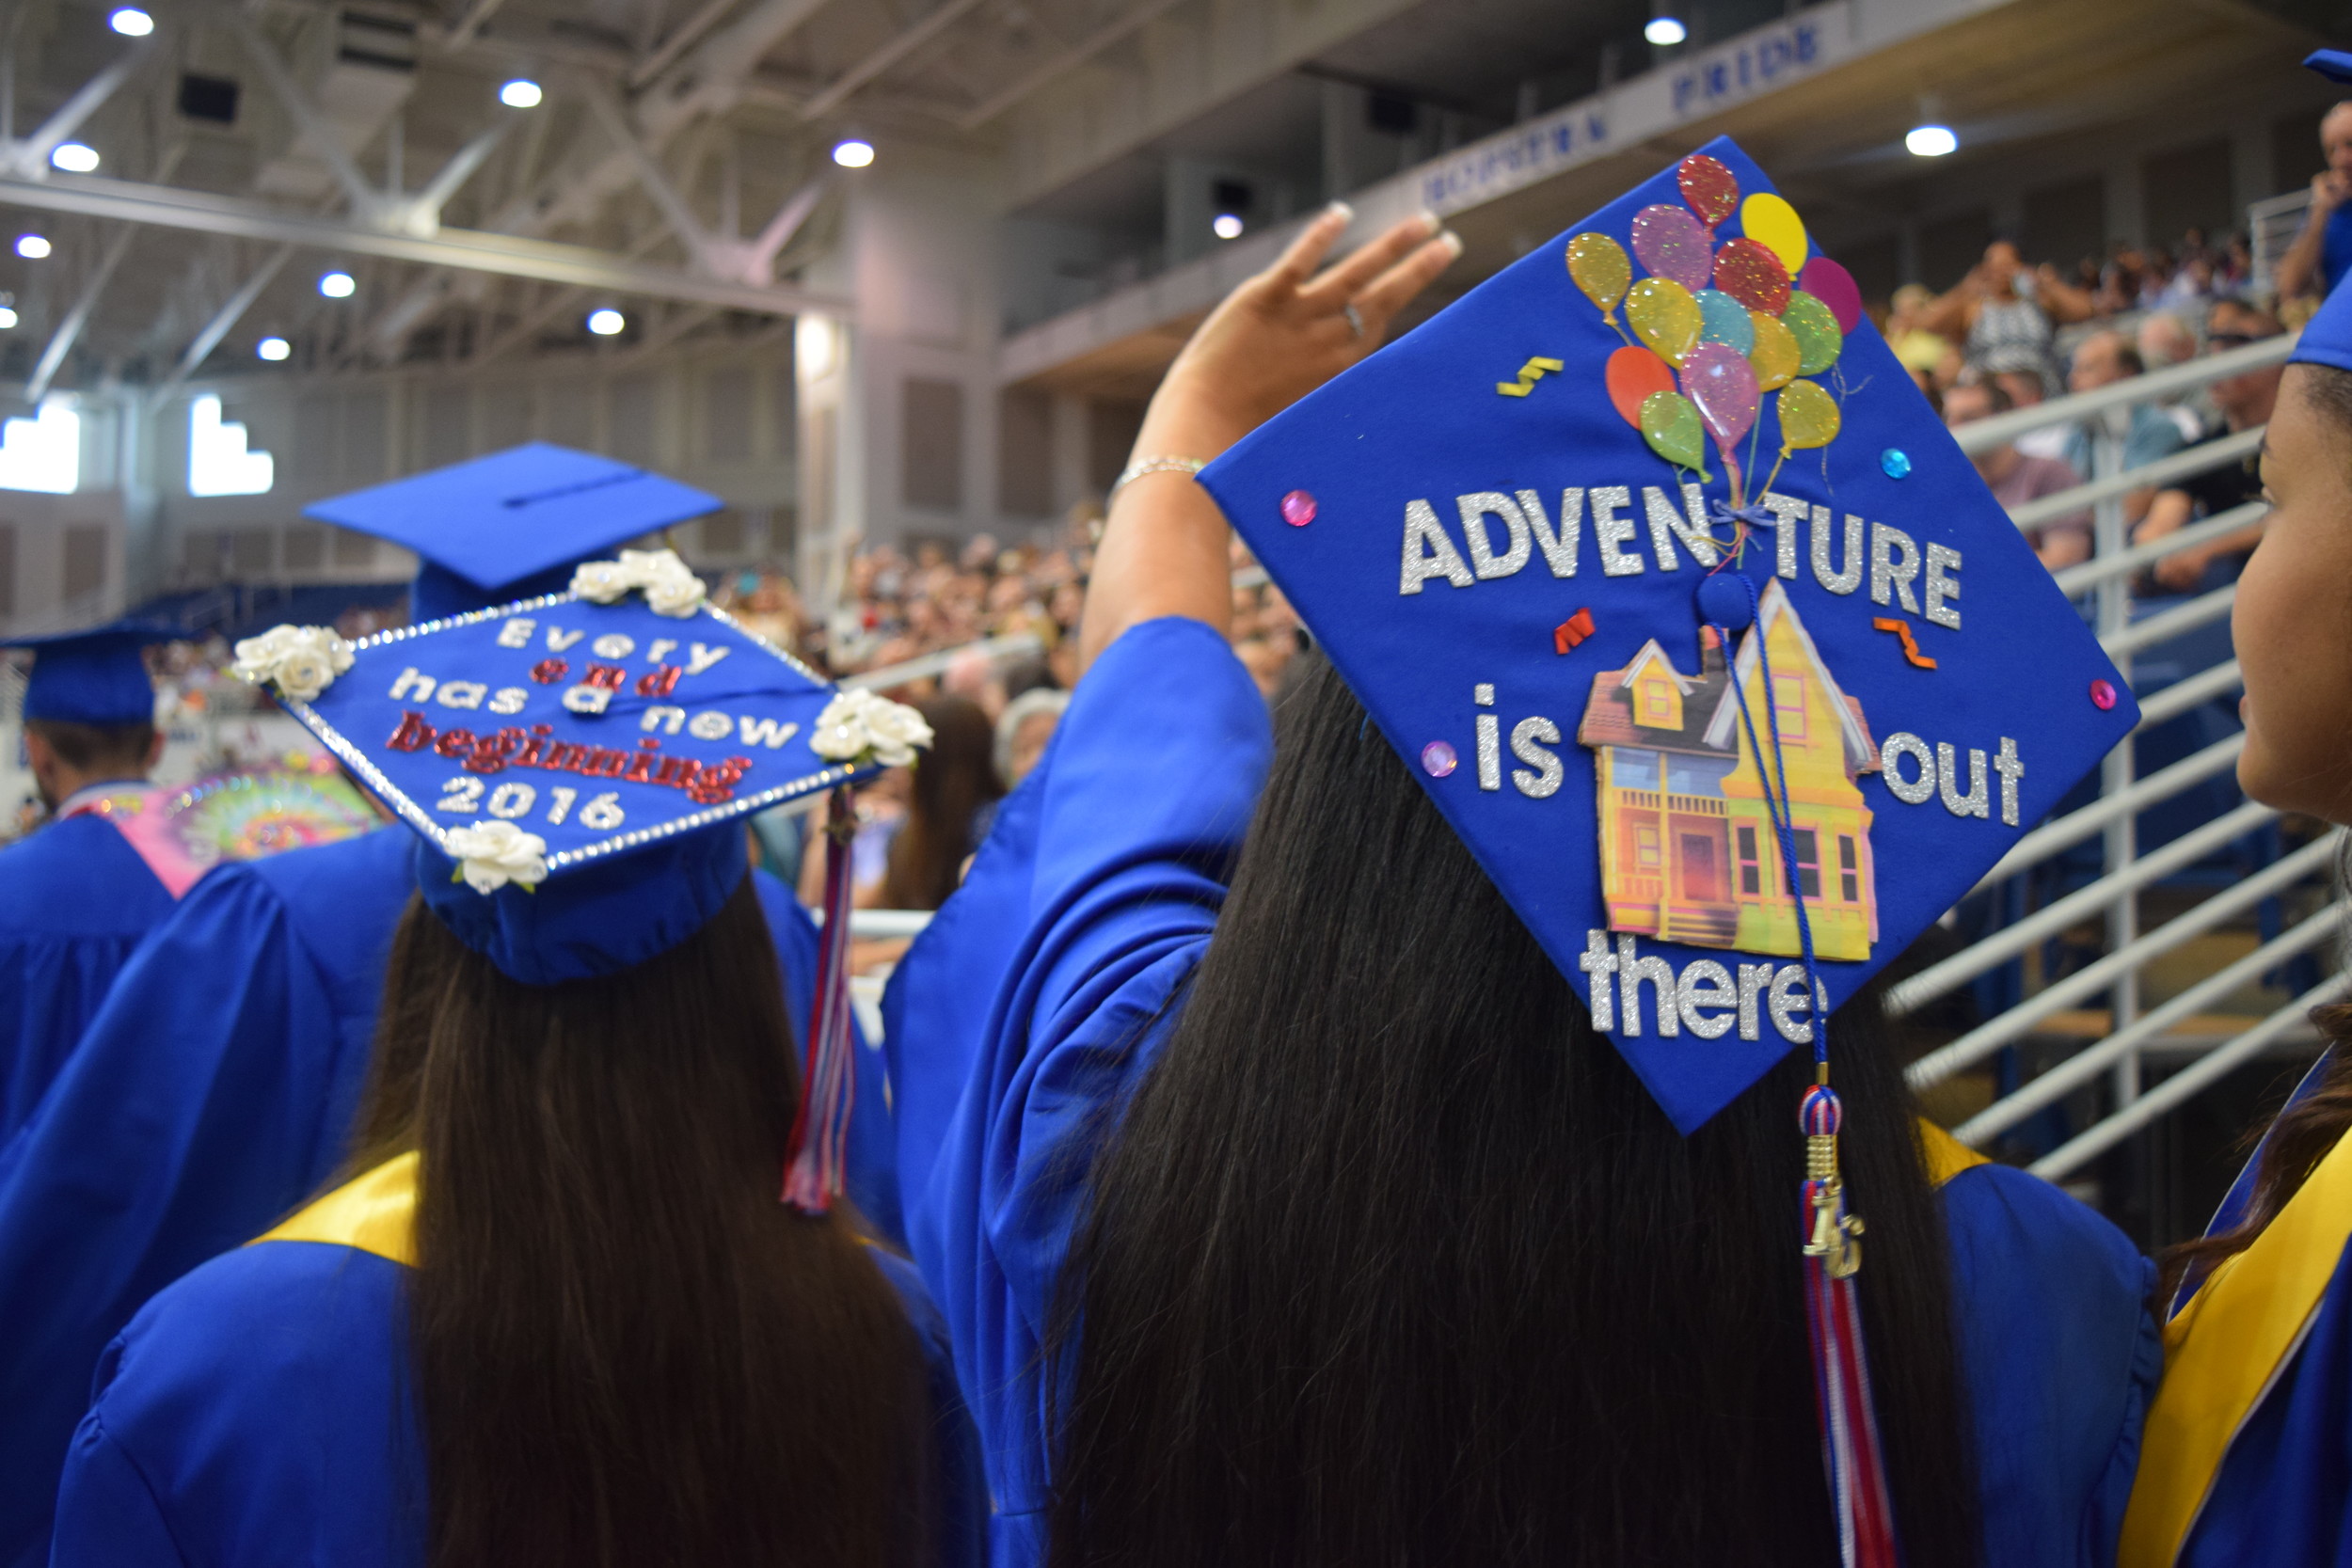 It was an exciting day for MacArthur High School’s nearly 330 graduates, who received their diplomas in a morning ceremony at Hofstra University last Saturday. Many of the students found unique ways to express their sentiments on their mortarboards.